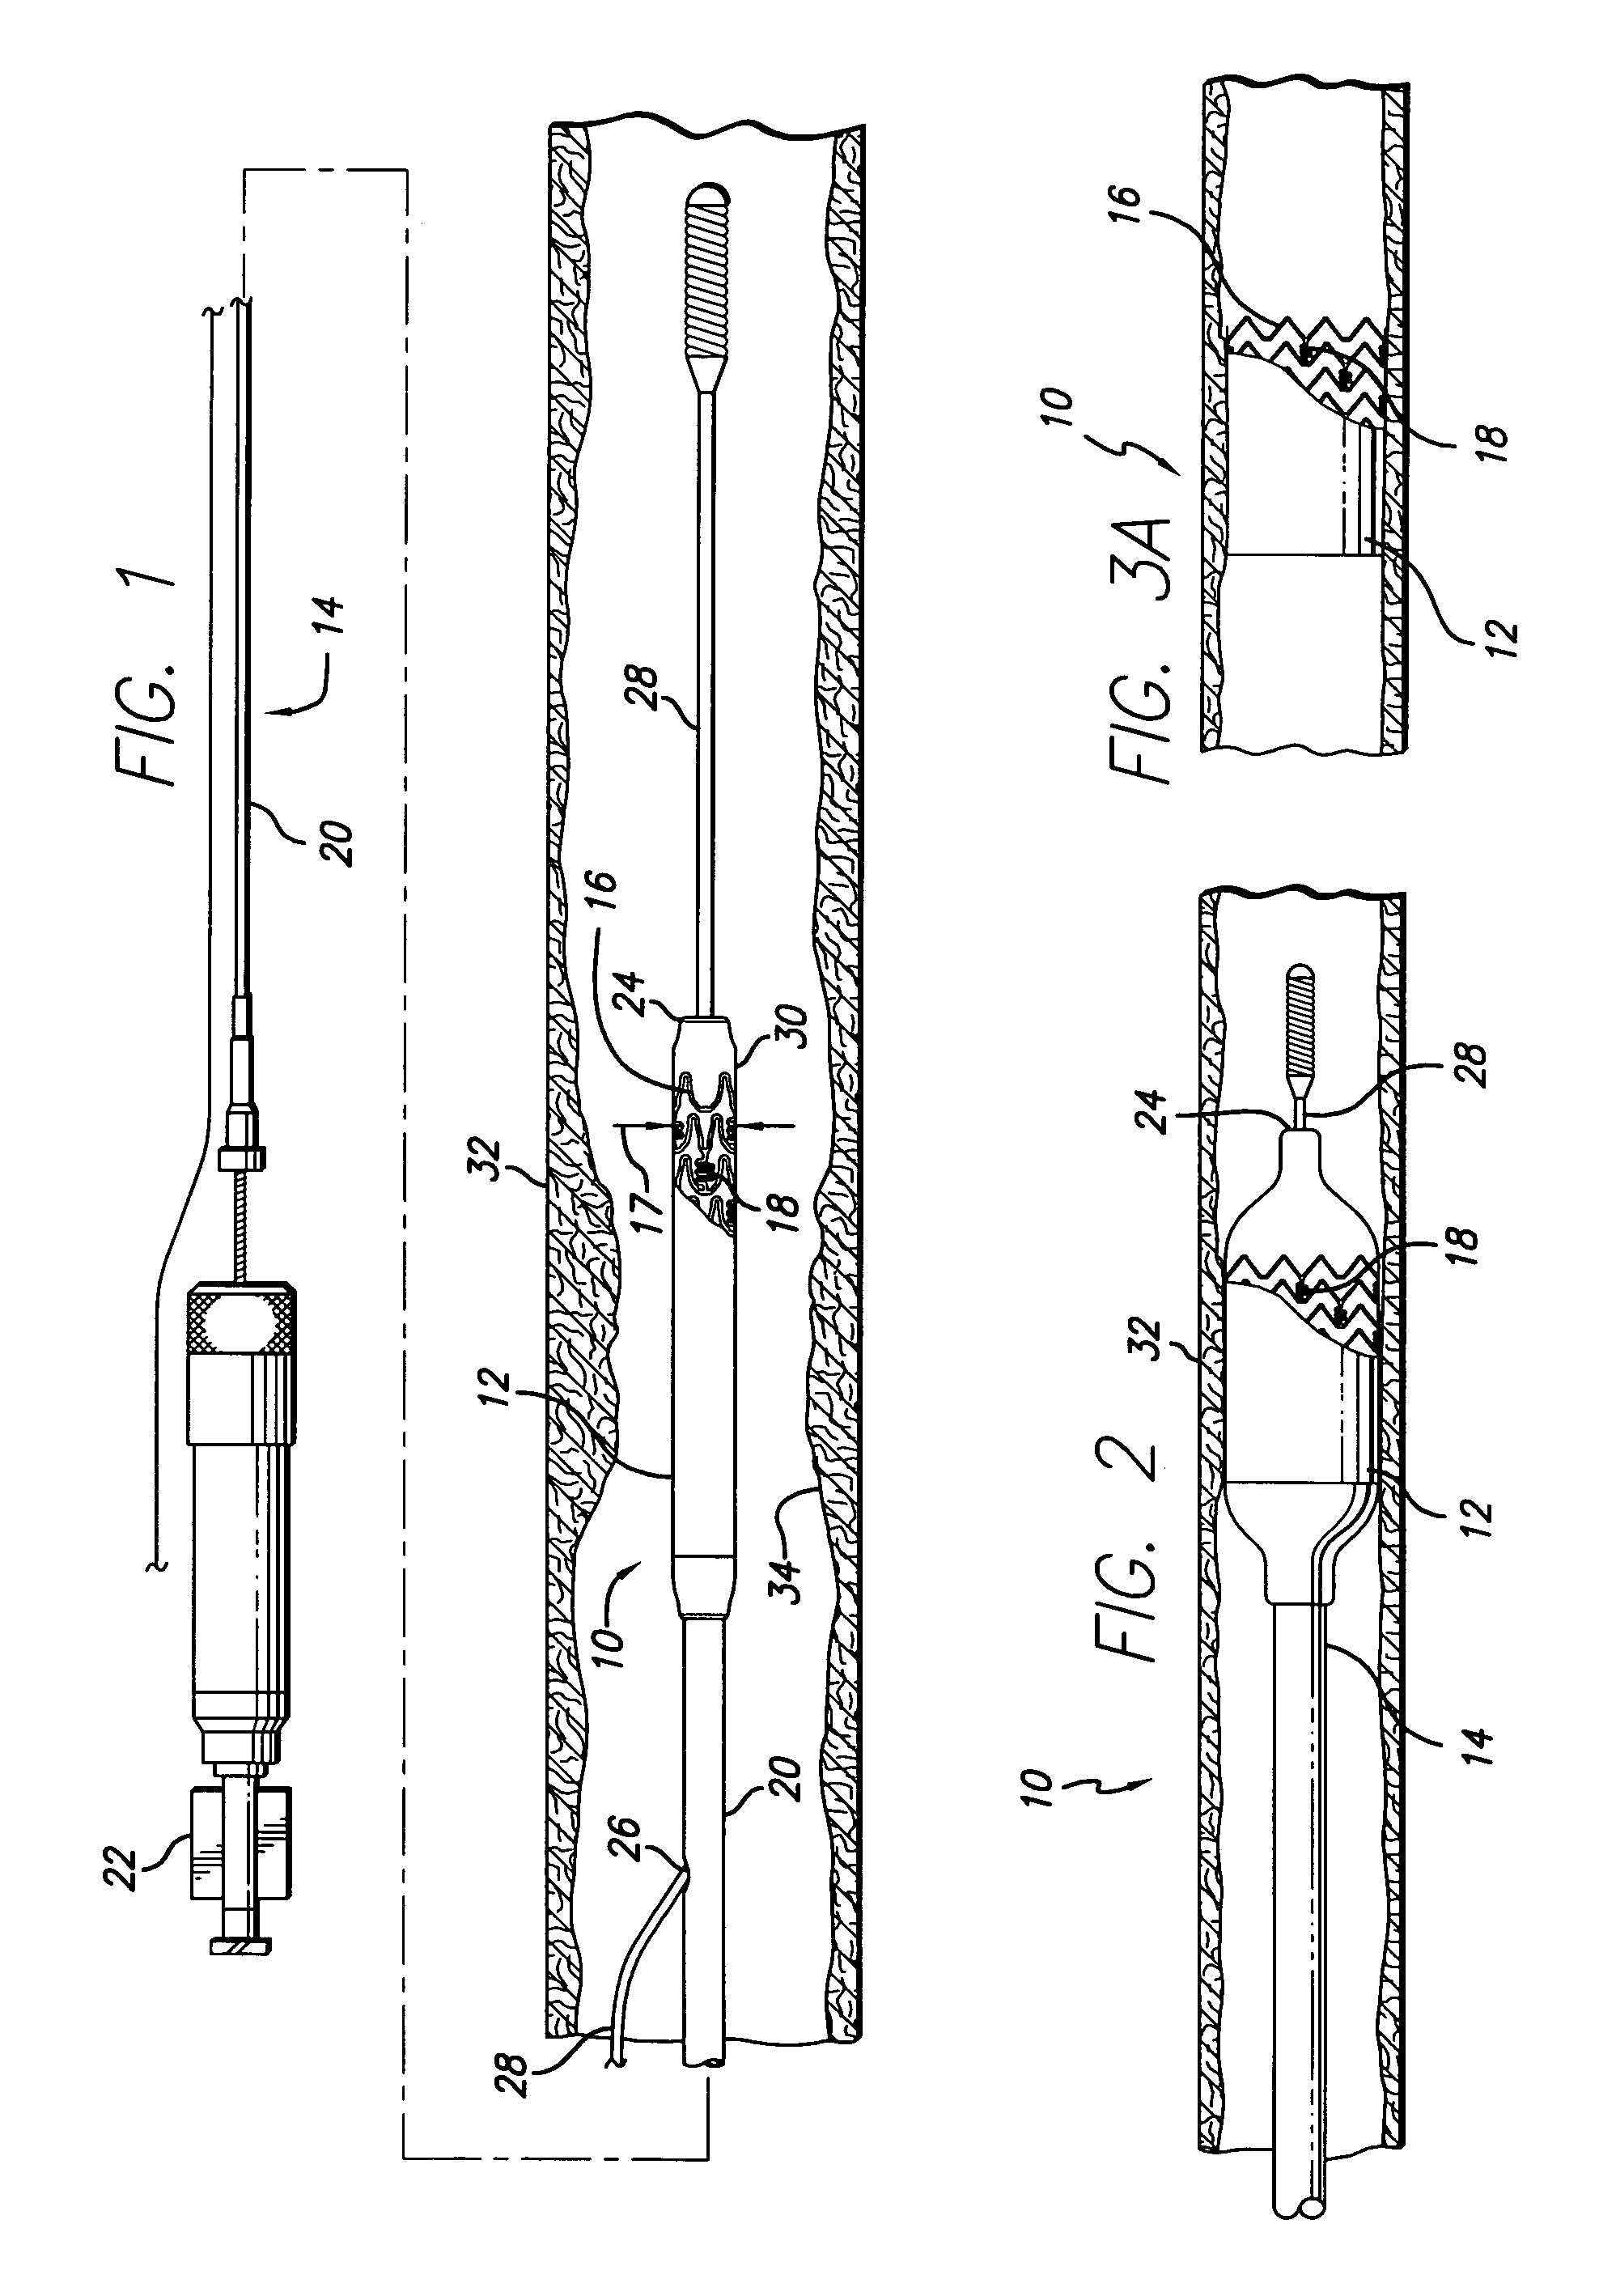 Drug-eluting stent cover and method of use